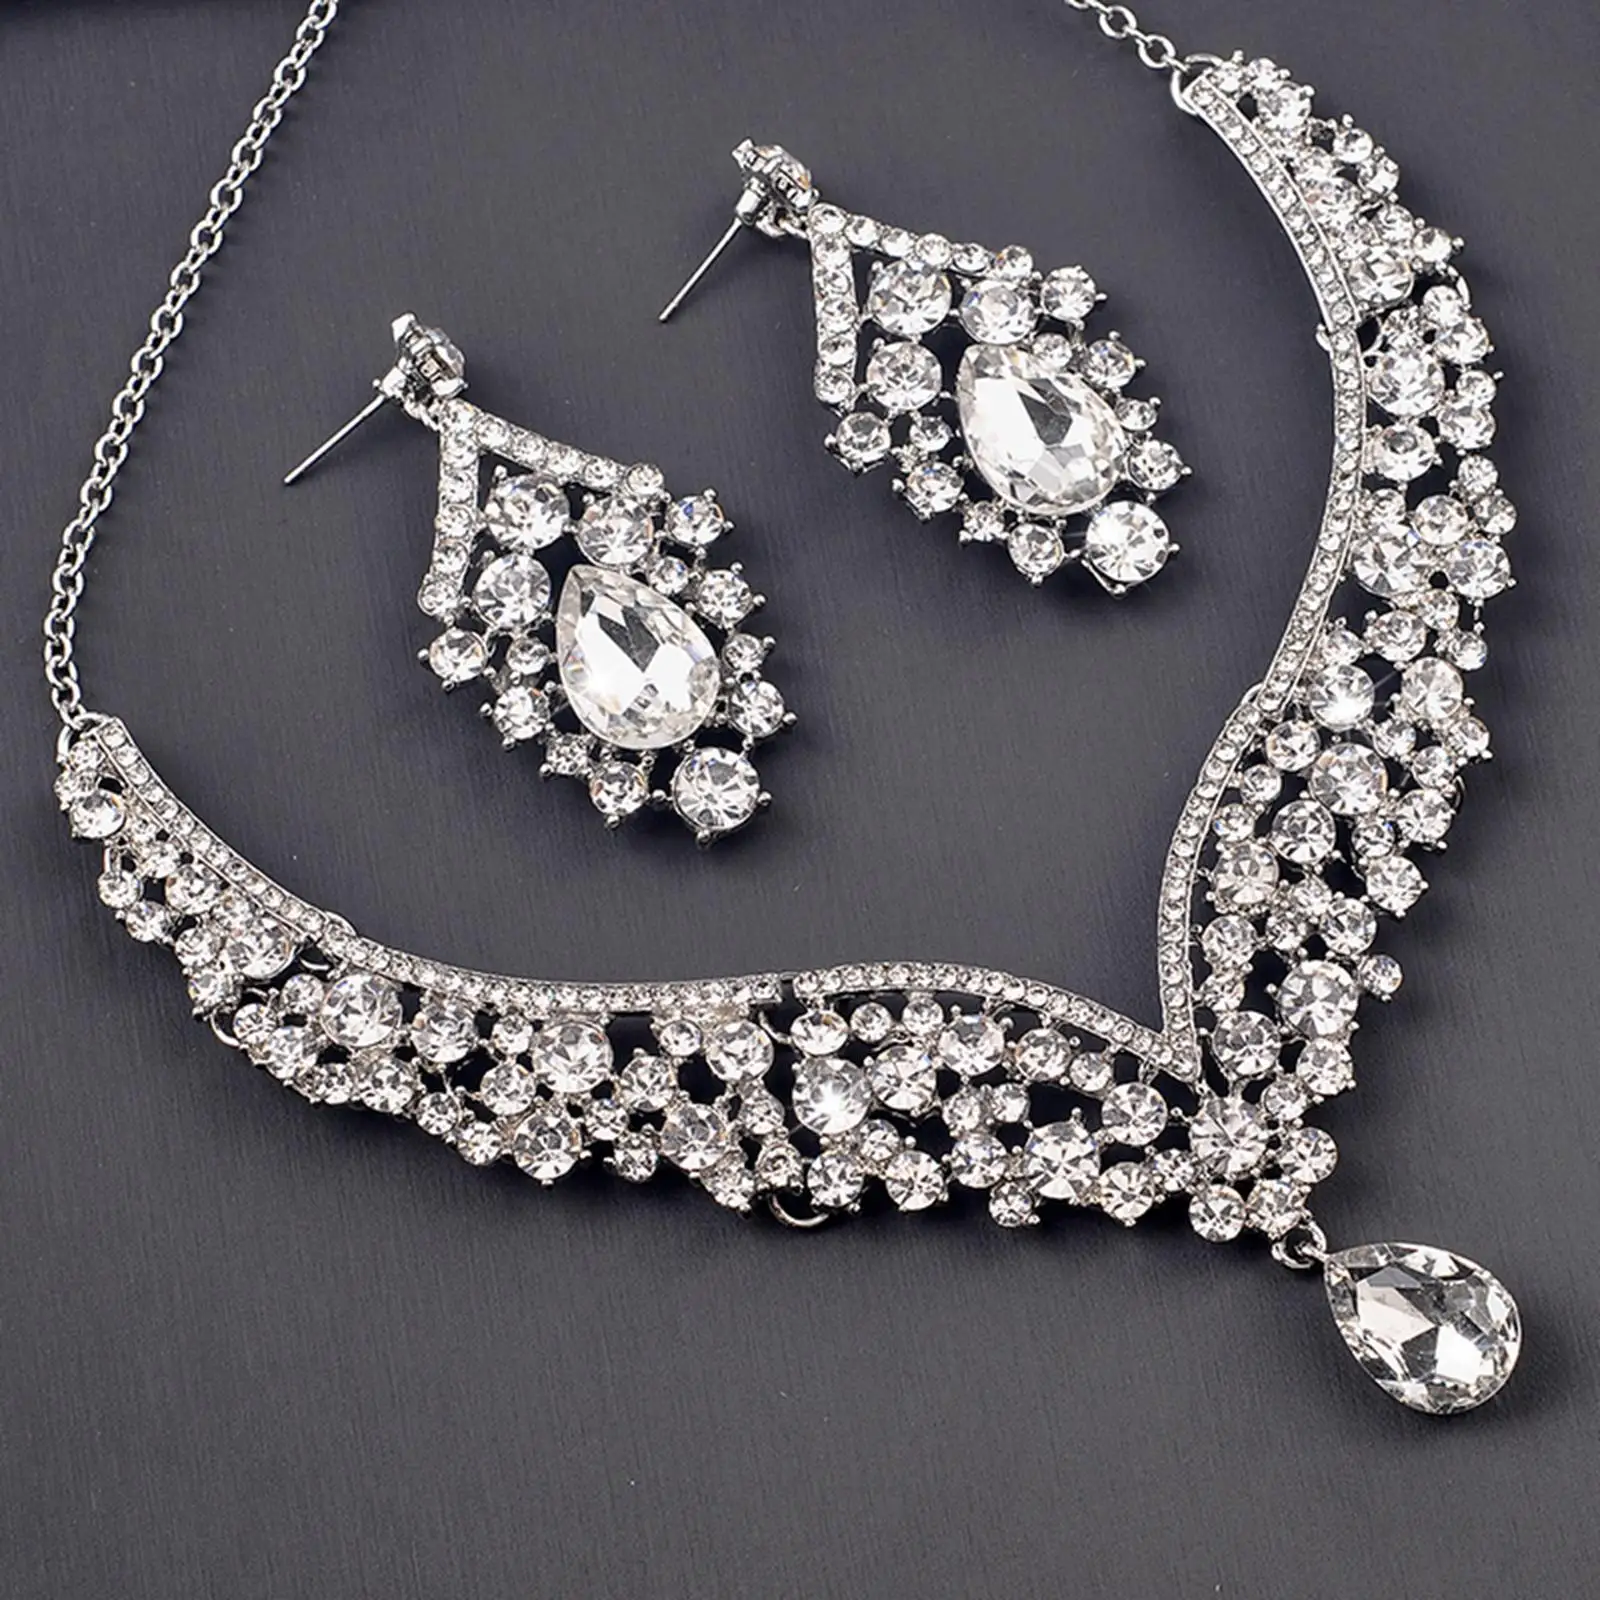 Jewelry Set for Women, Necklace Earrings Set, Wedding Party Jewelry for Bridal Bridesmaid